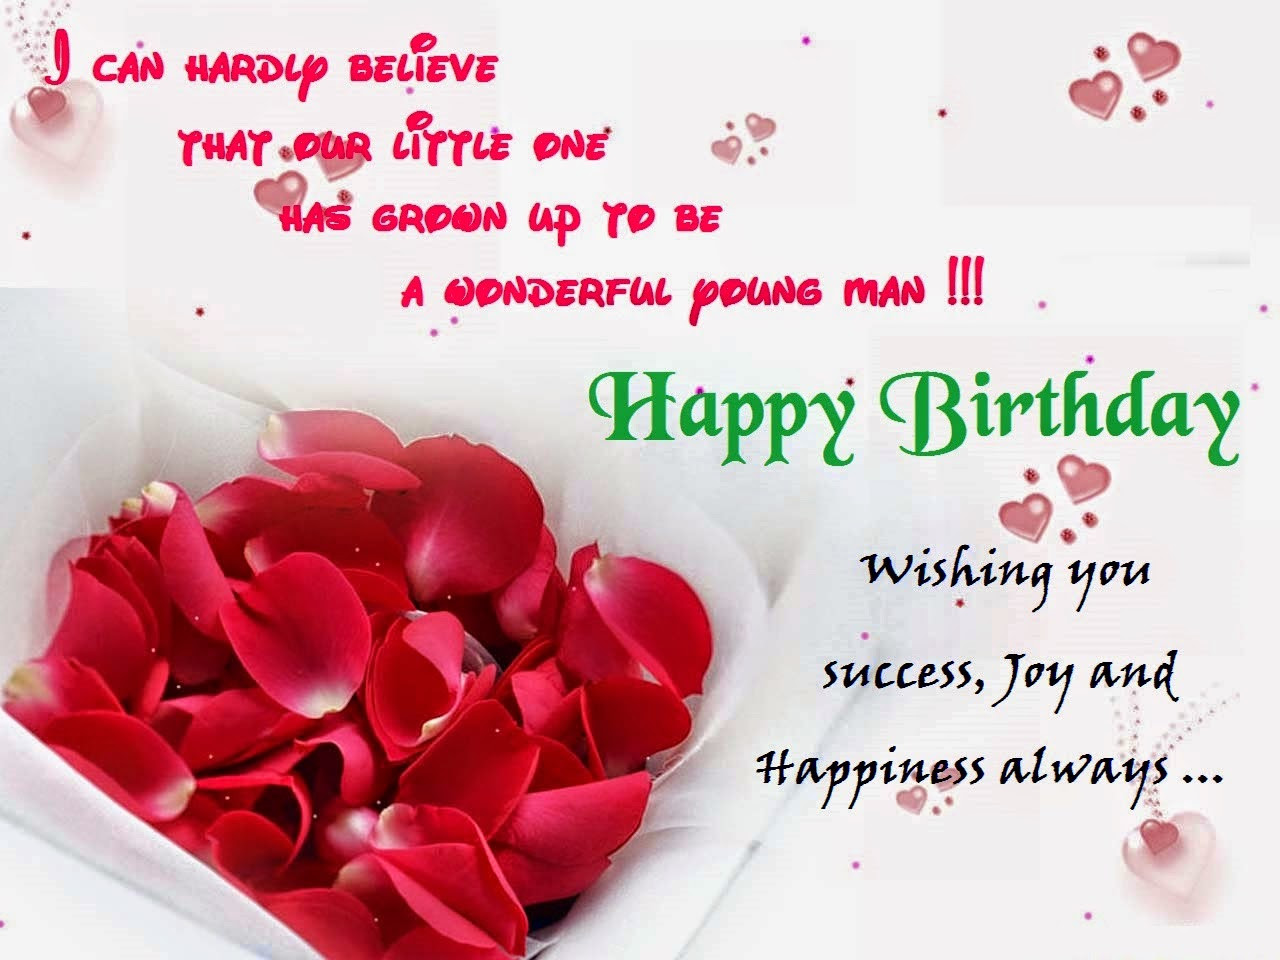 Happy Birthday To Someone Special Quotes
 Friendship Quotes For Someone Special QuotesGram